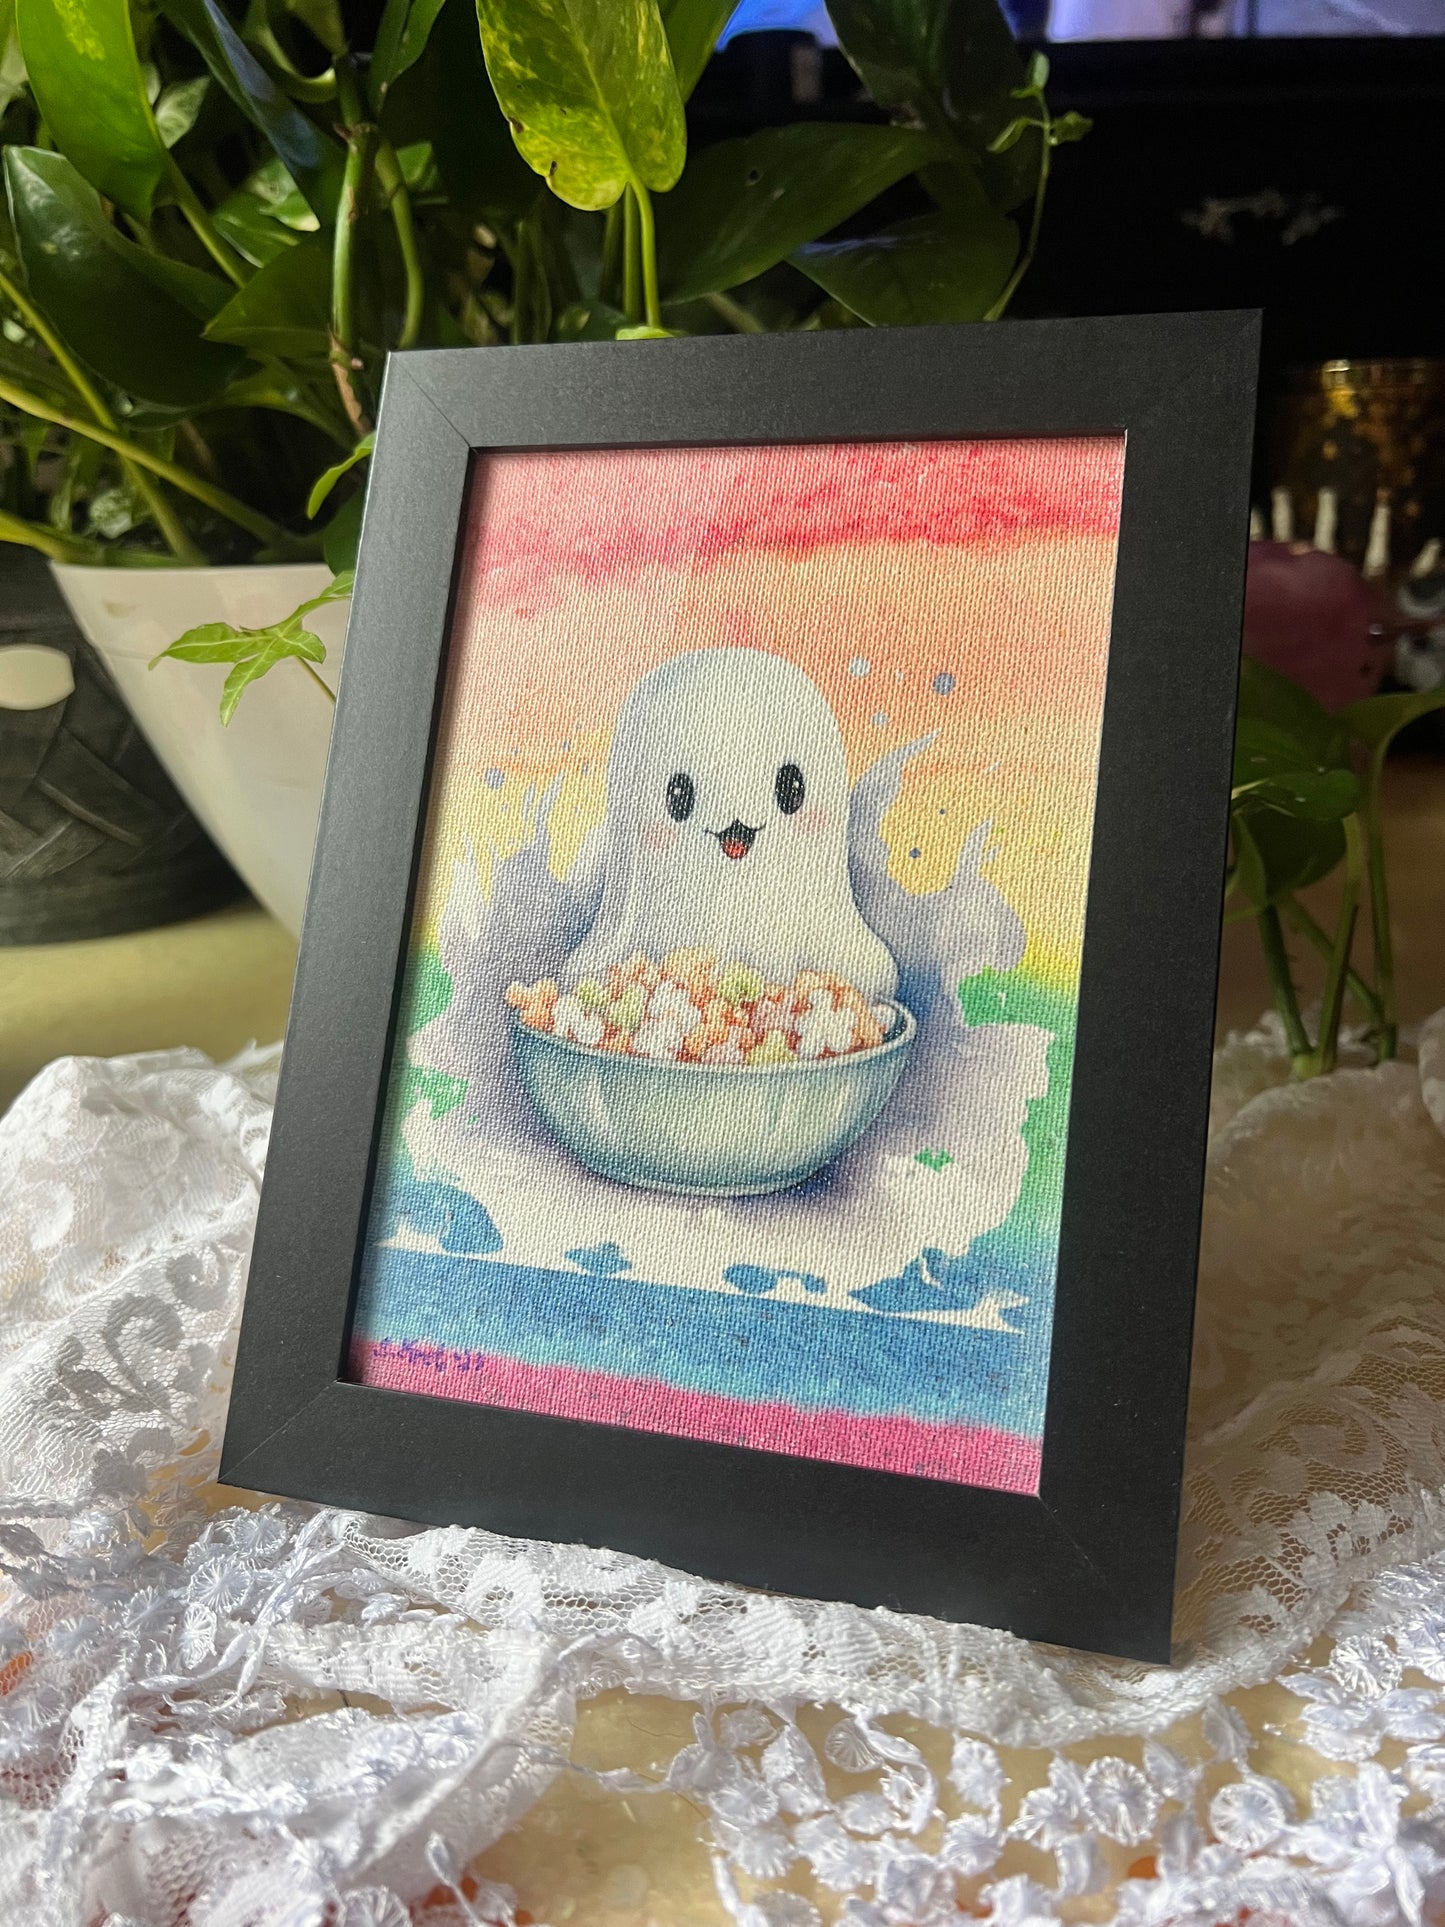 Cute Ghost Picture, Framed, Tabletop Display, Wall Hanging 5x7, Ghost Eating Snacks